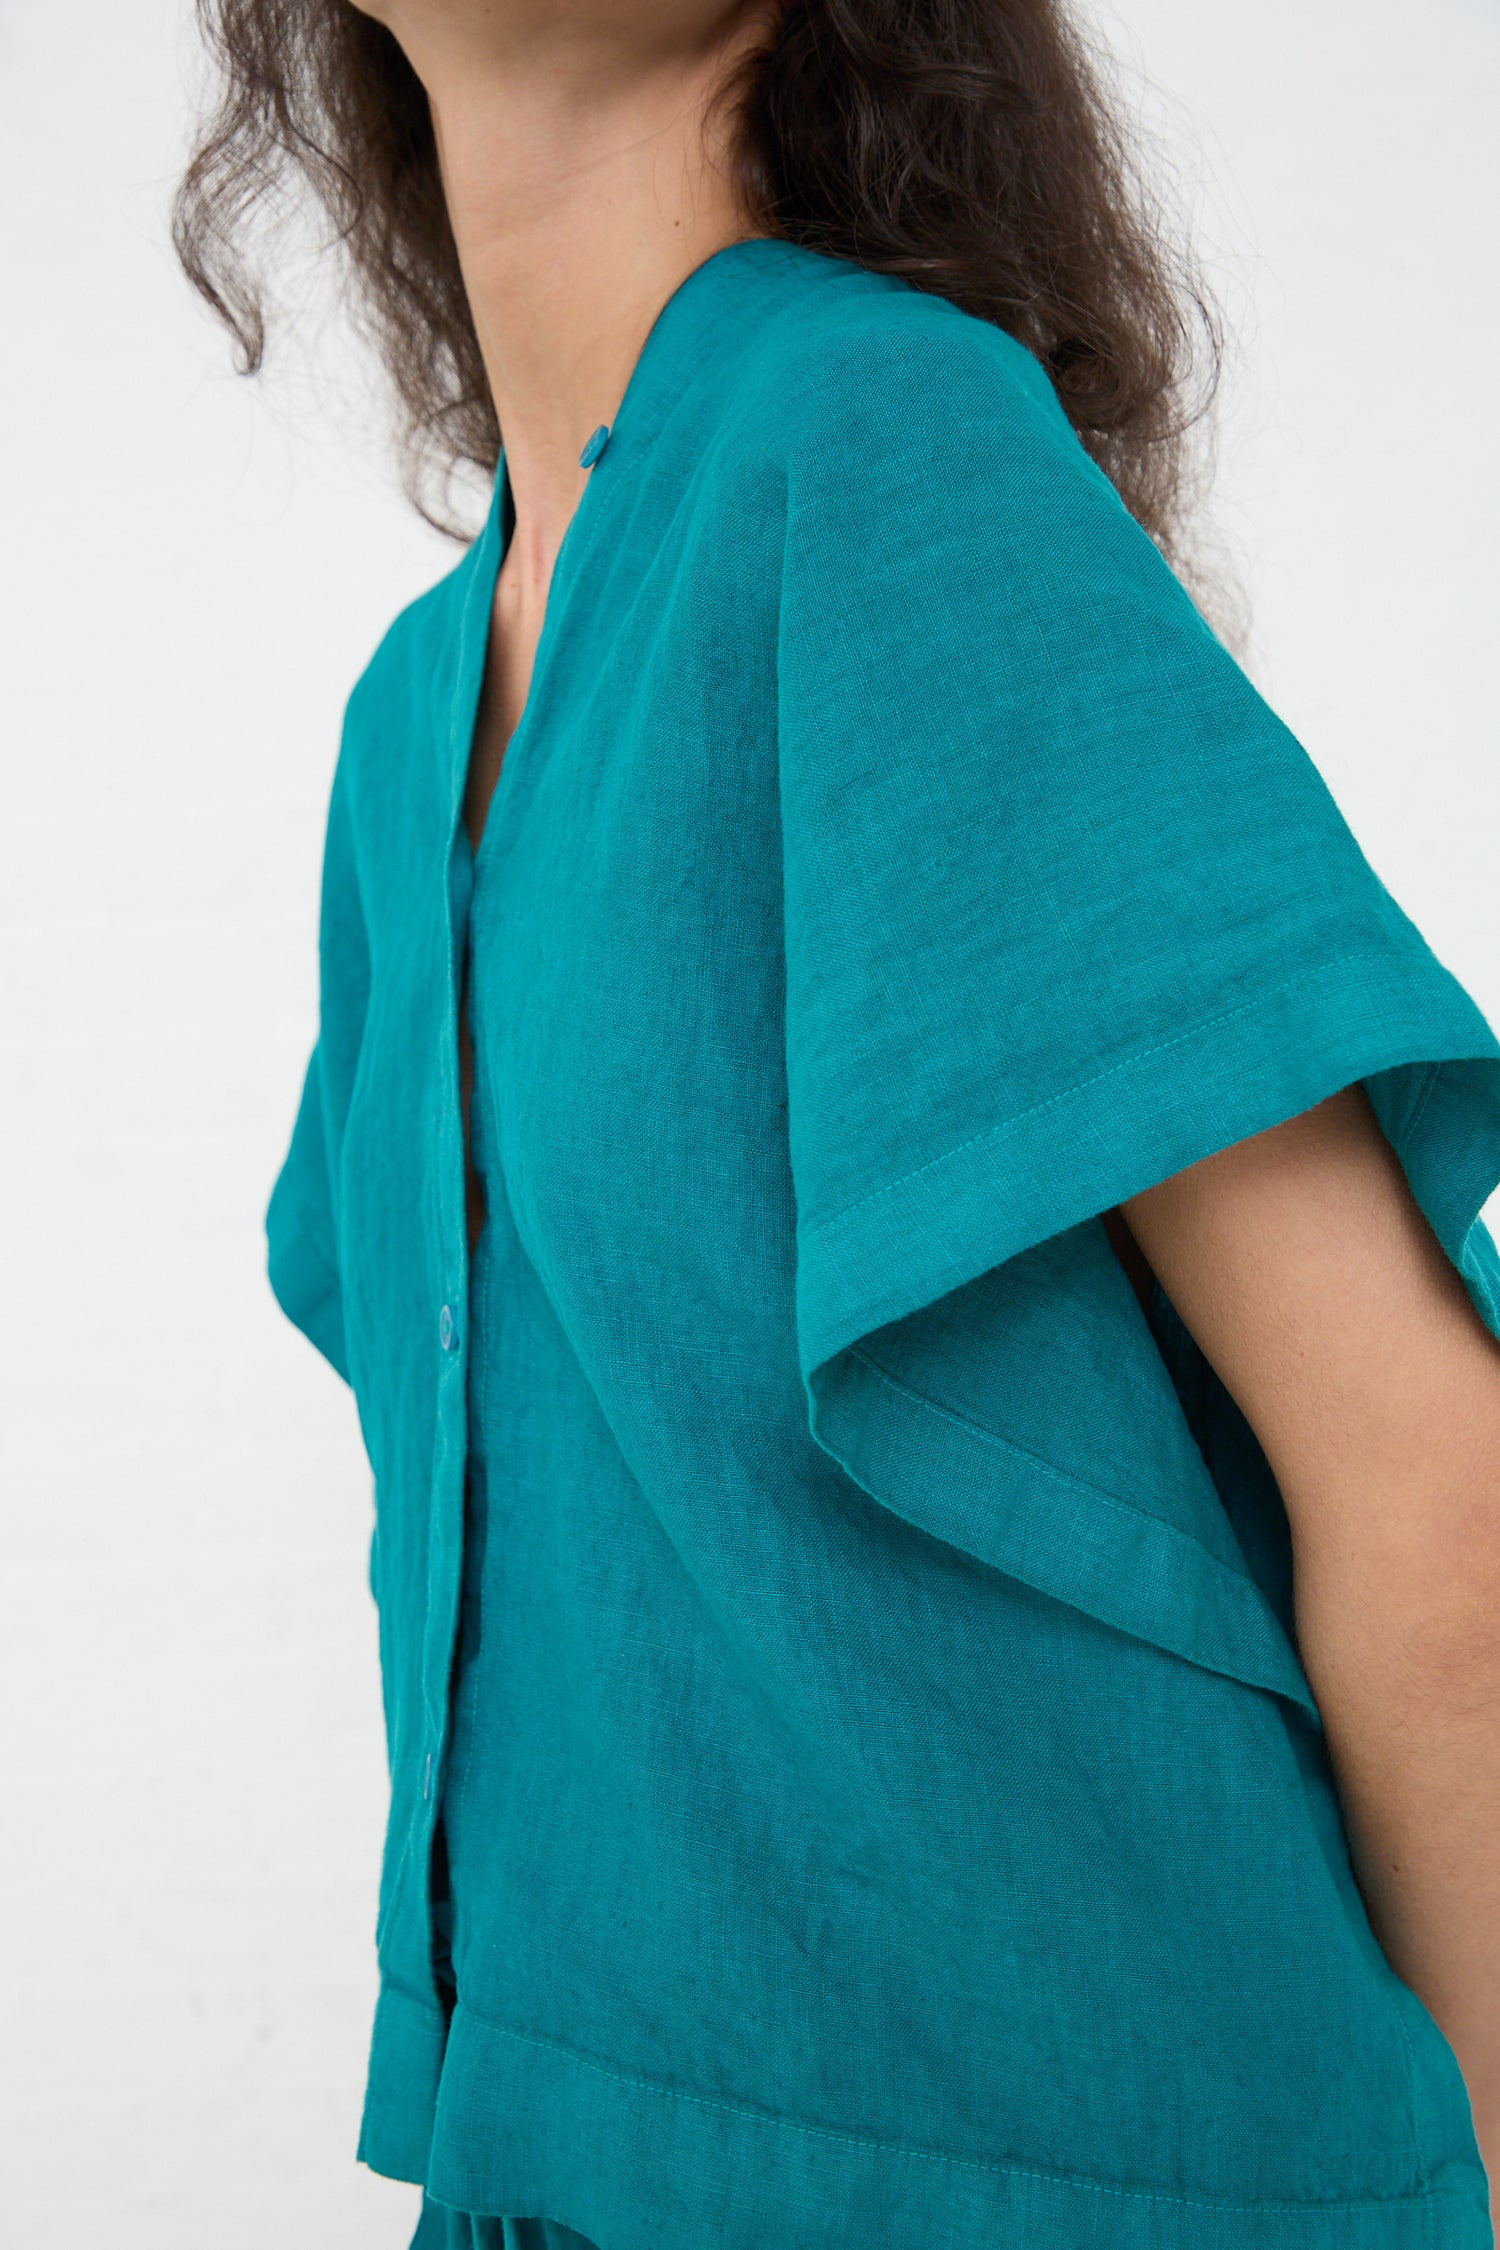 A person wearing a Linen Origami Top in Peacock by Black Crane, photographed from the side with a focus on the shoulder area against a white background.